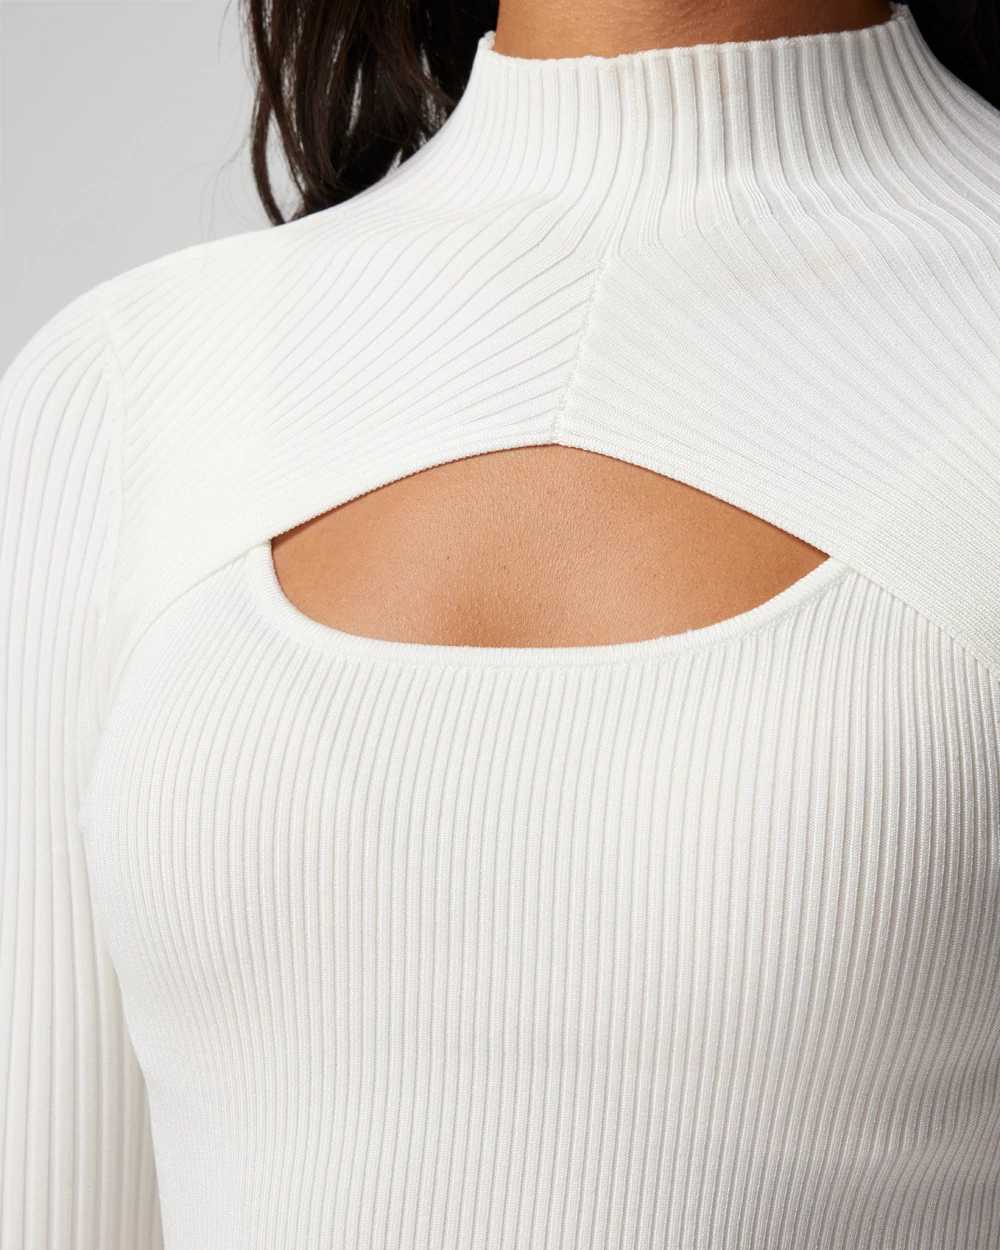 Long Sleeve Cutout Mockneck Top click to view larger image.